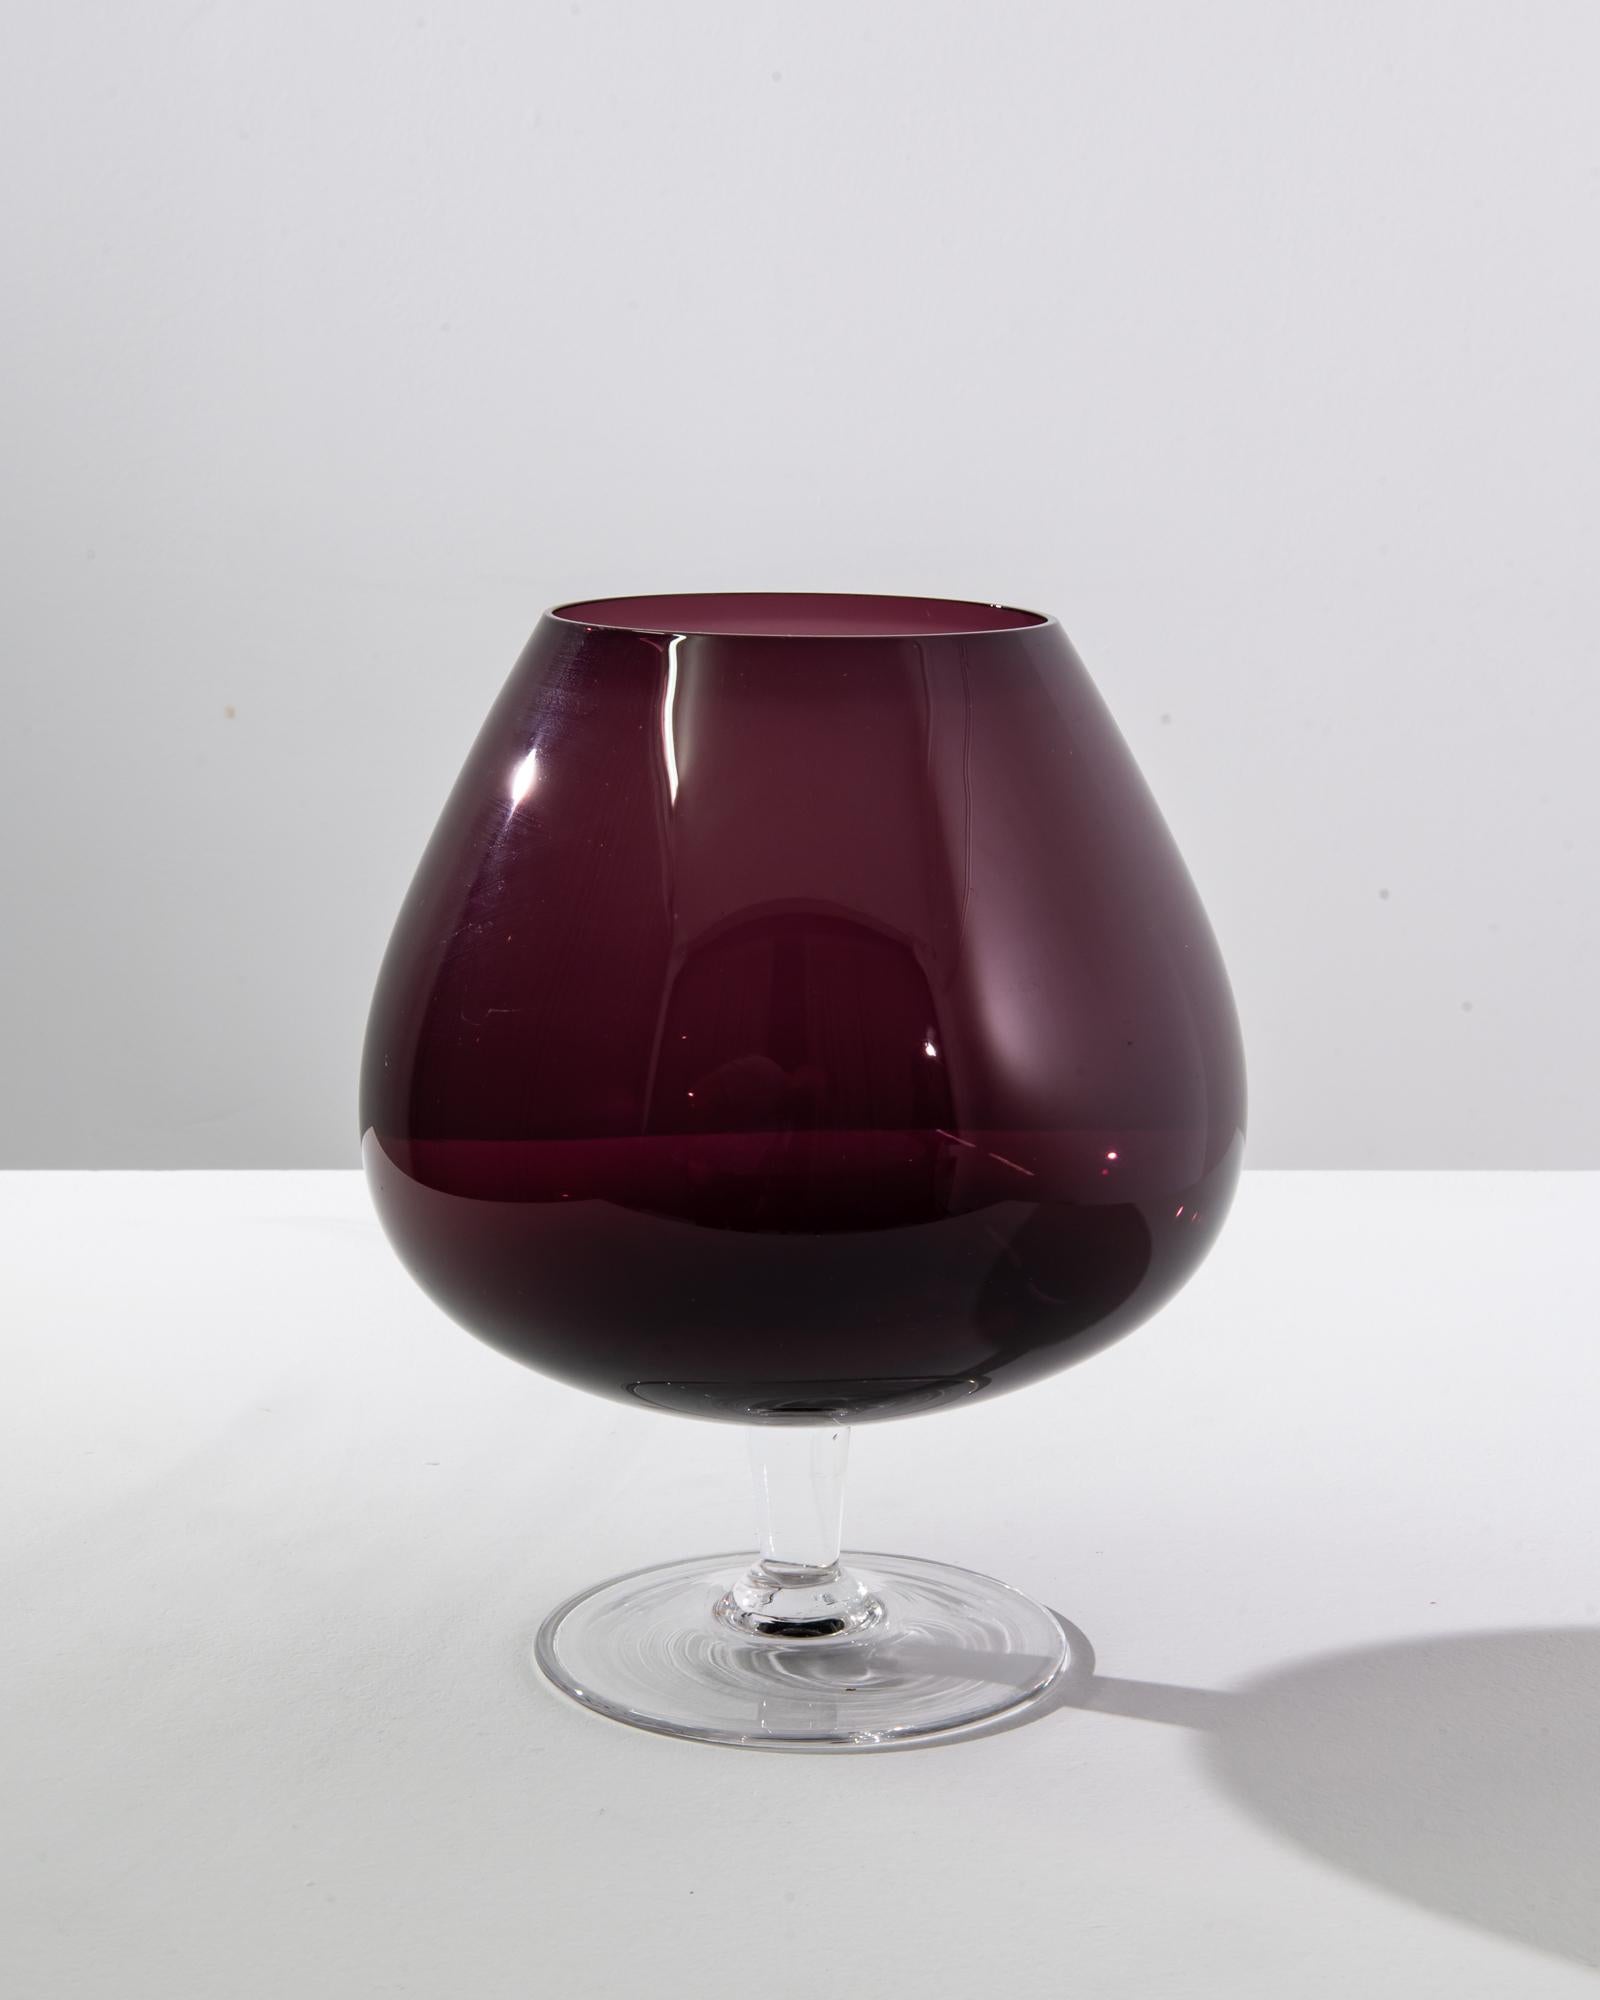 Elevate your dining experience with this stunning Italian purple glass goblet from the 1960s, a time when craftsmanship met the peak of elegance. The deep burgundy hue of the glass captures the essence of vintage luxury, reminiscent of a fine wine,